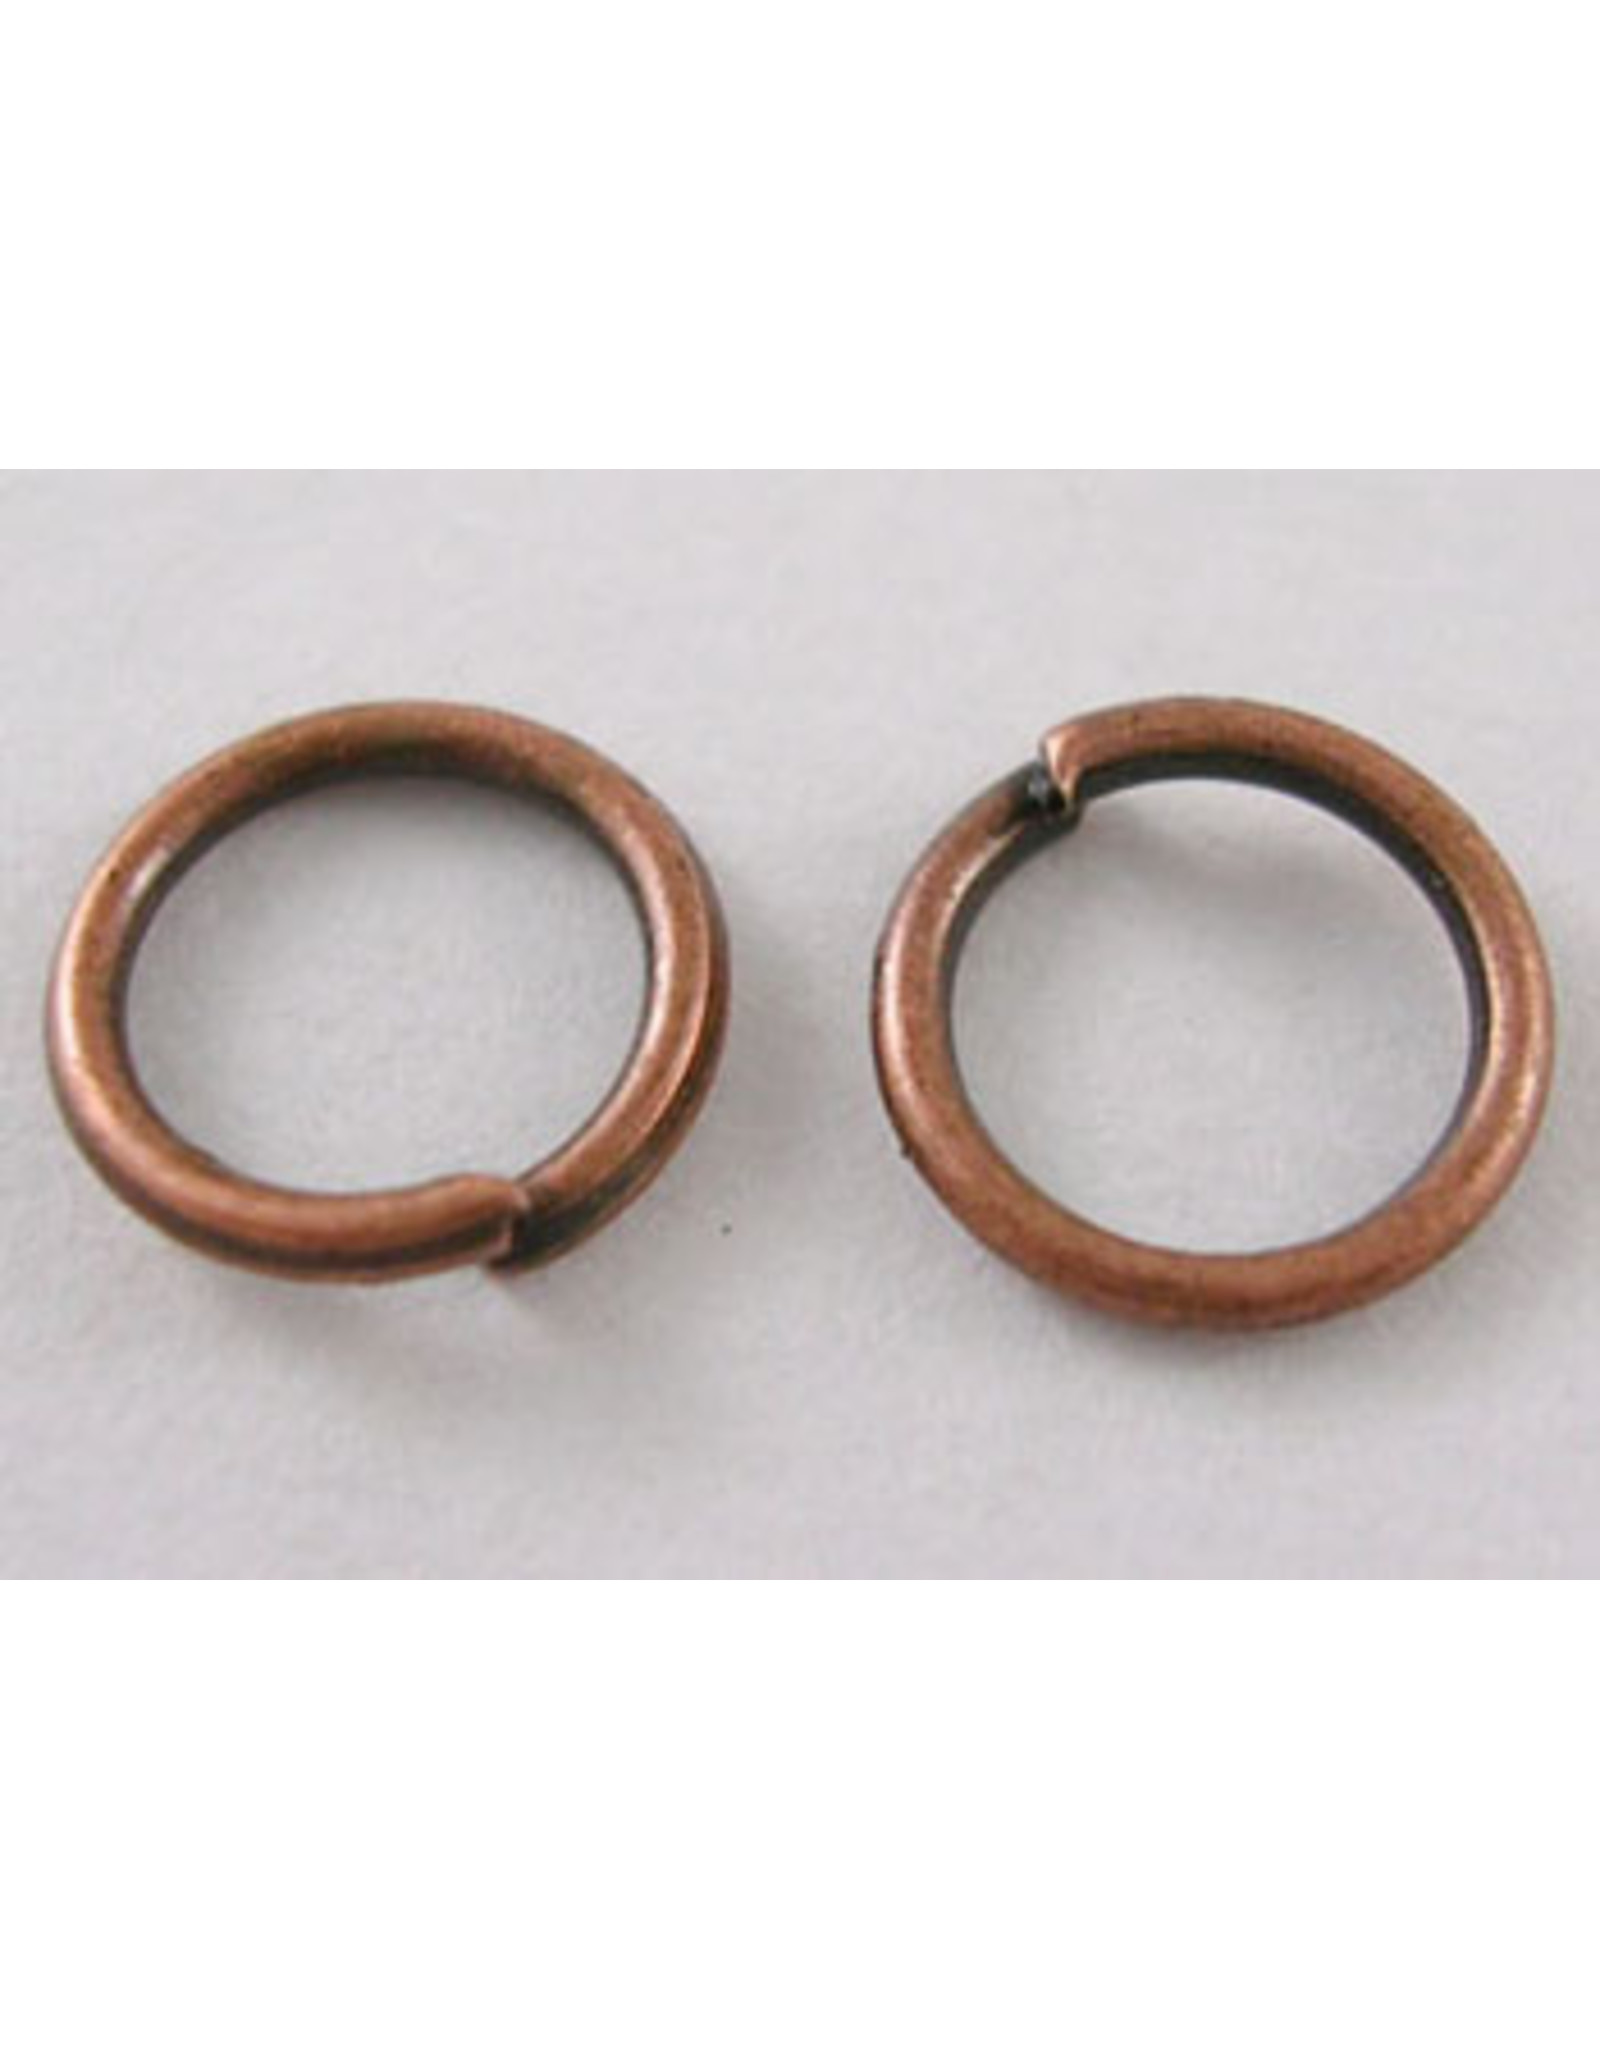 Jump Ring 5mm Antique Copper  approx 22g  x100 NF